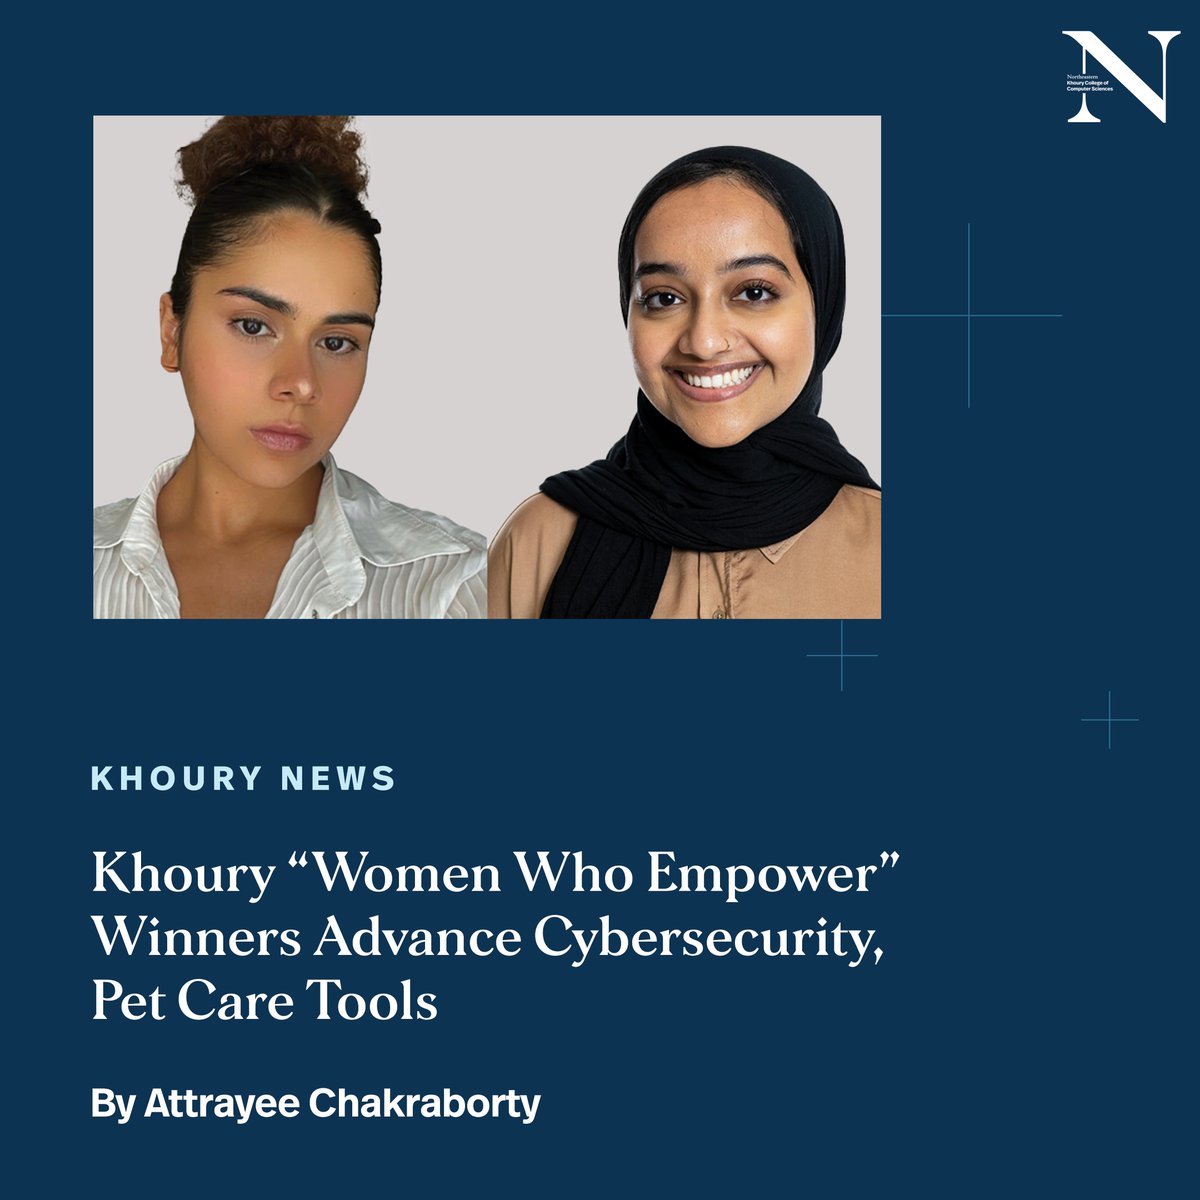 Alexis Musaelyan-Blackmon wants to build user-friendly phishing defenses. Dania Alnahdi wants to make it easier to test pets for diseases at home. And now they both have a Northeastern award to fuel their efforts. bit.ly/45FAPHH